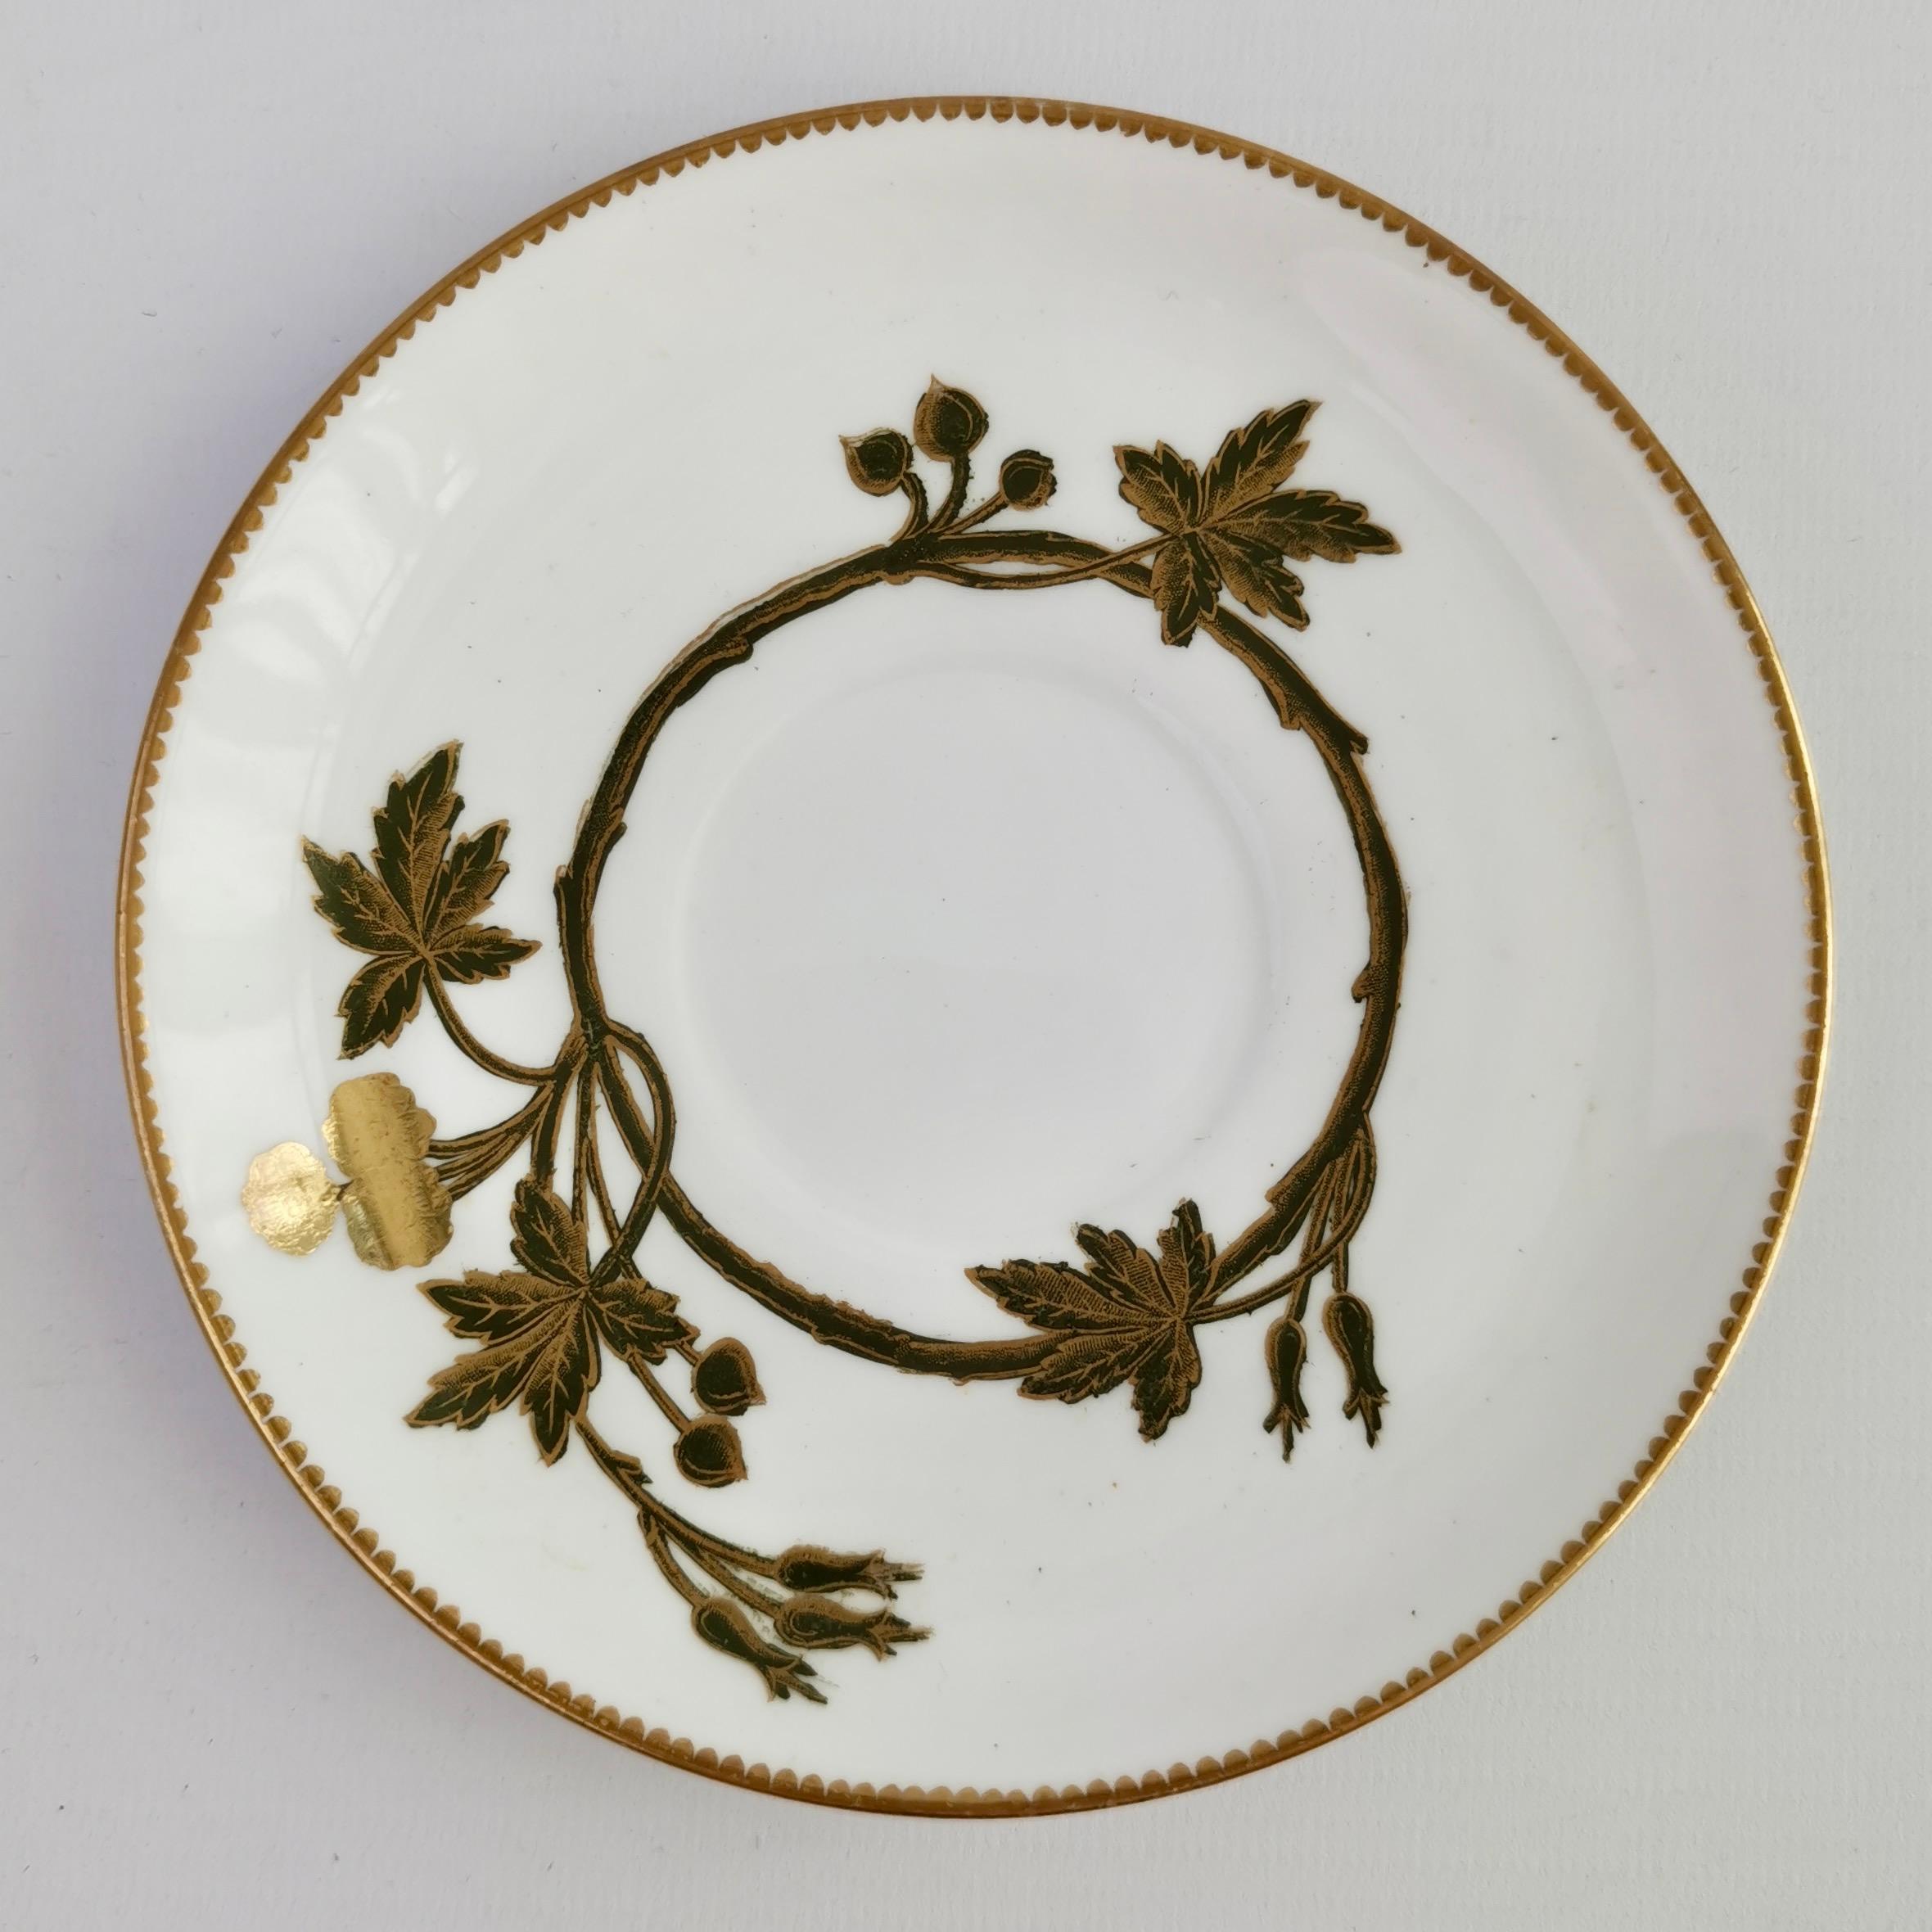 Hand-Painted English Porcelain Teacup, Aesthetic Movement Bronze-Gilt Sprigs, ca 1875